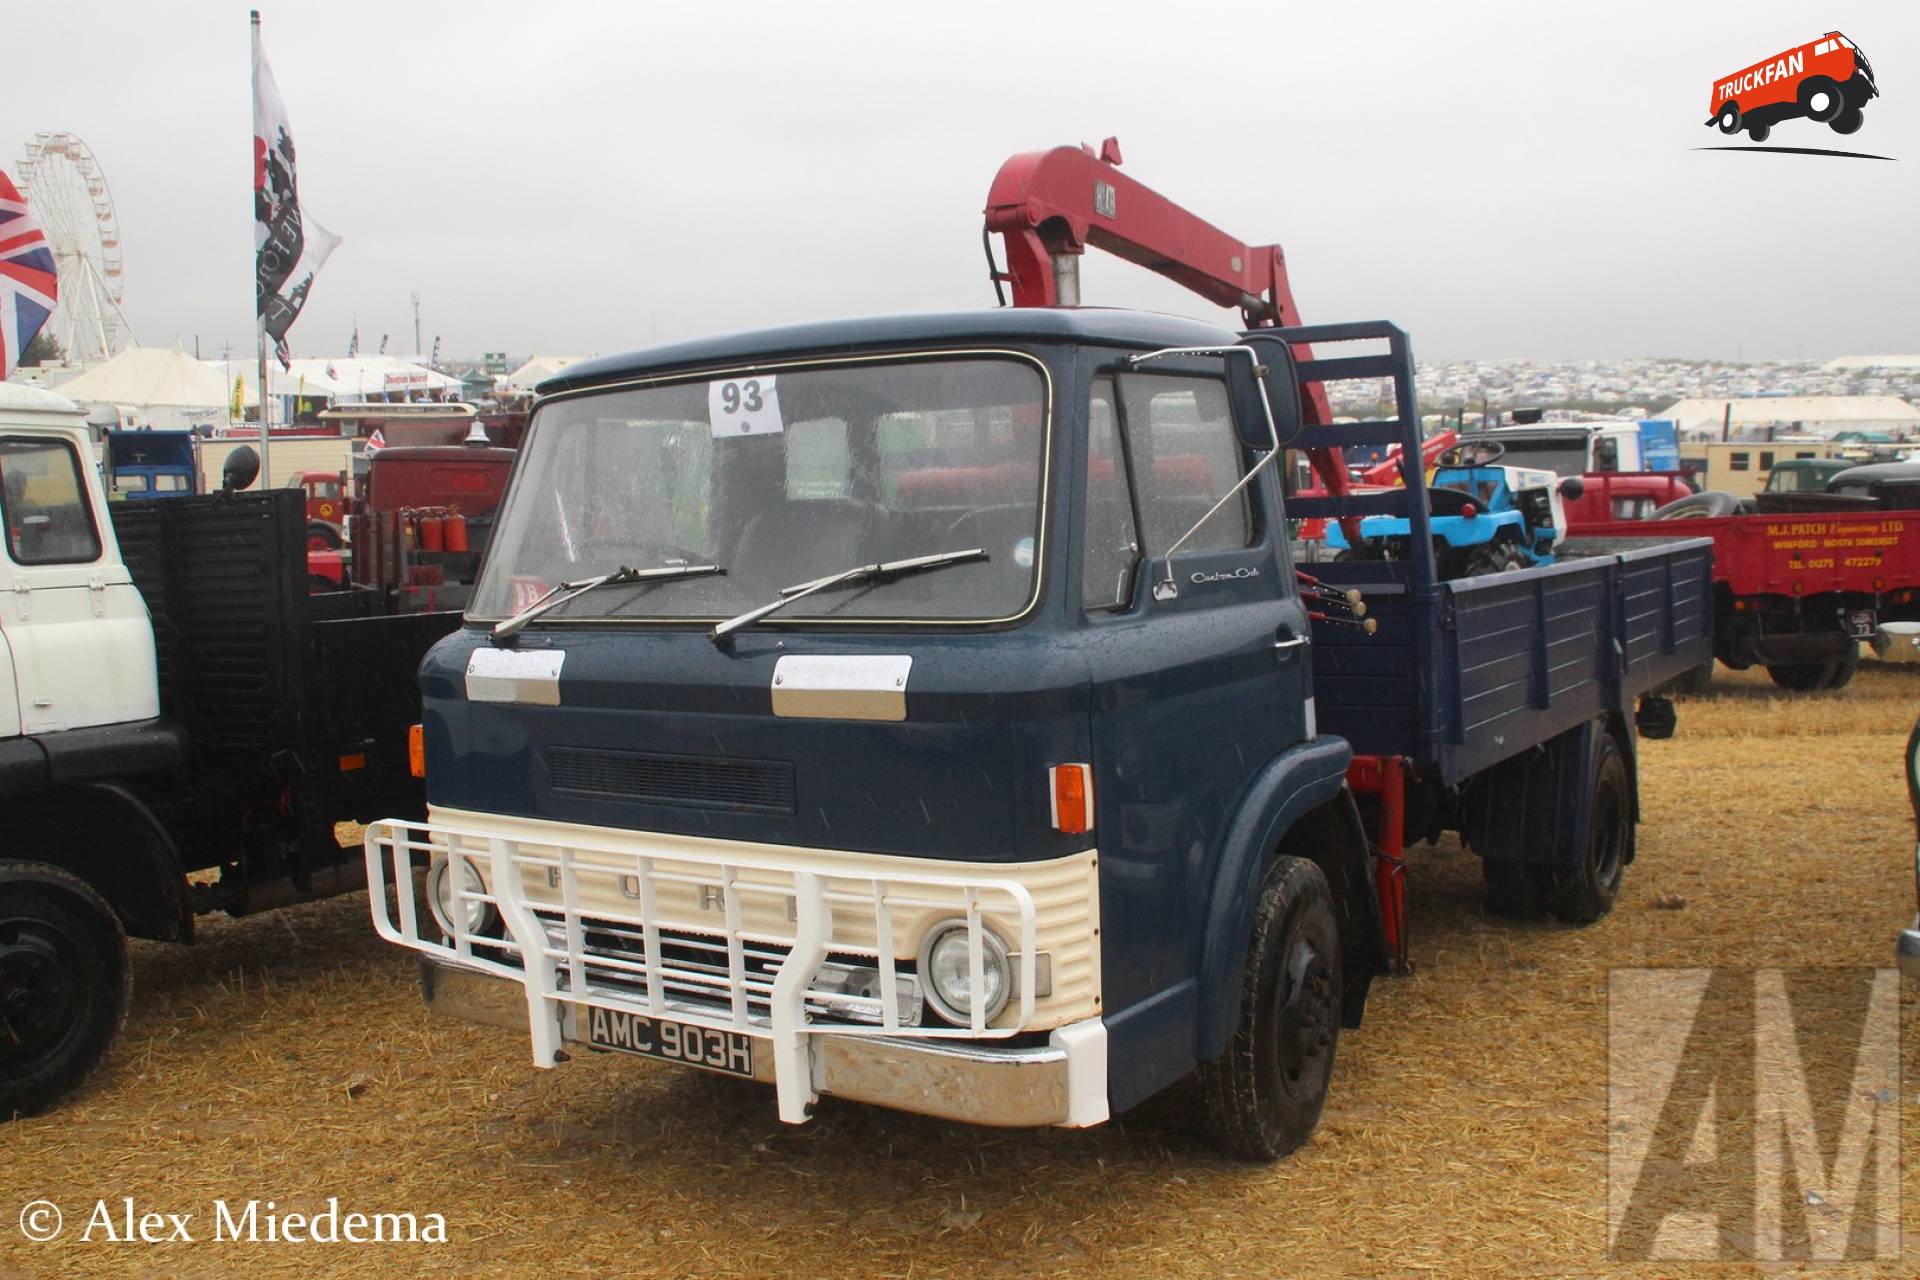 Ford D-serie